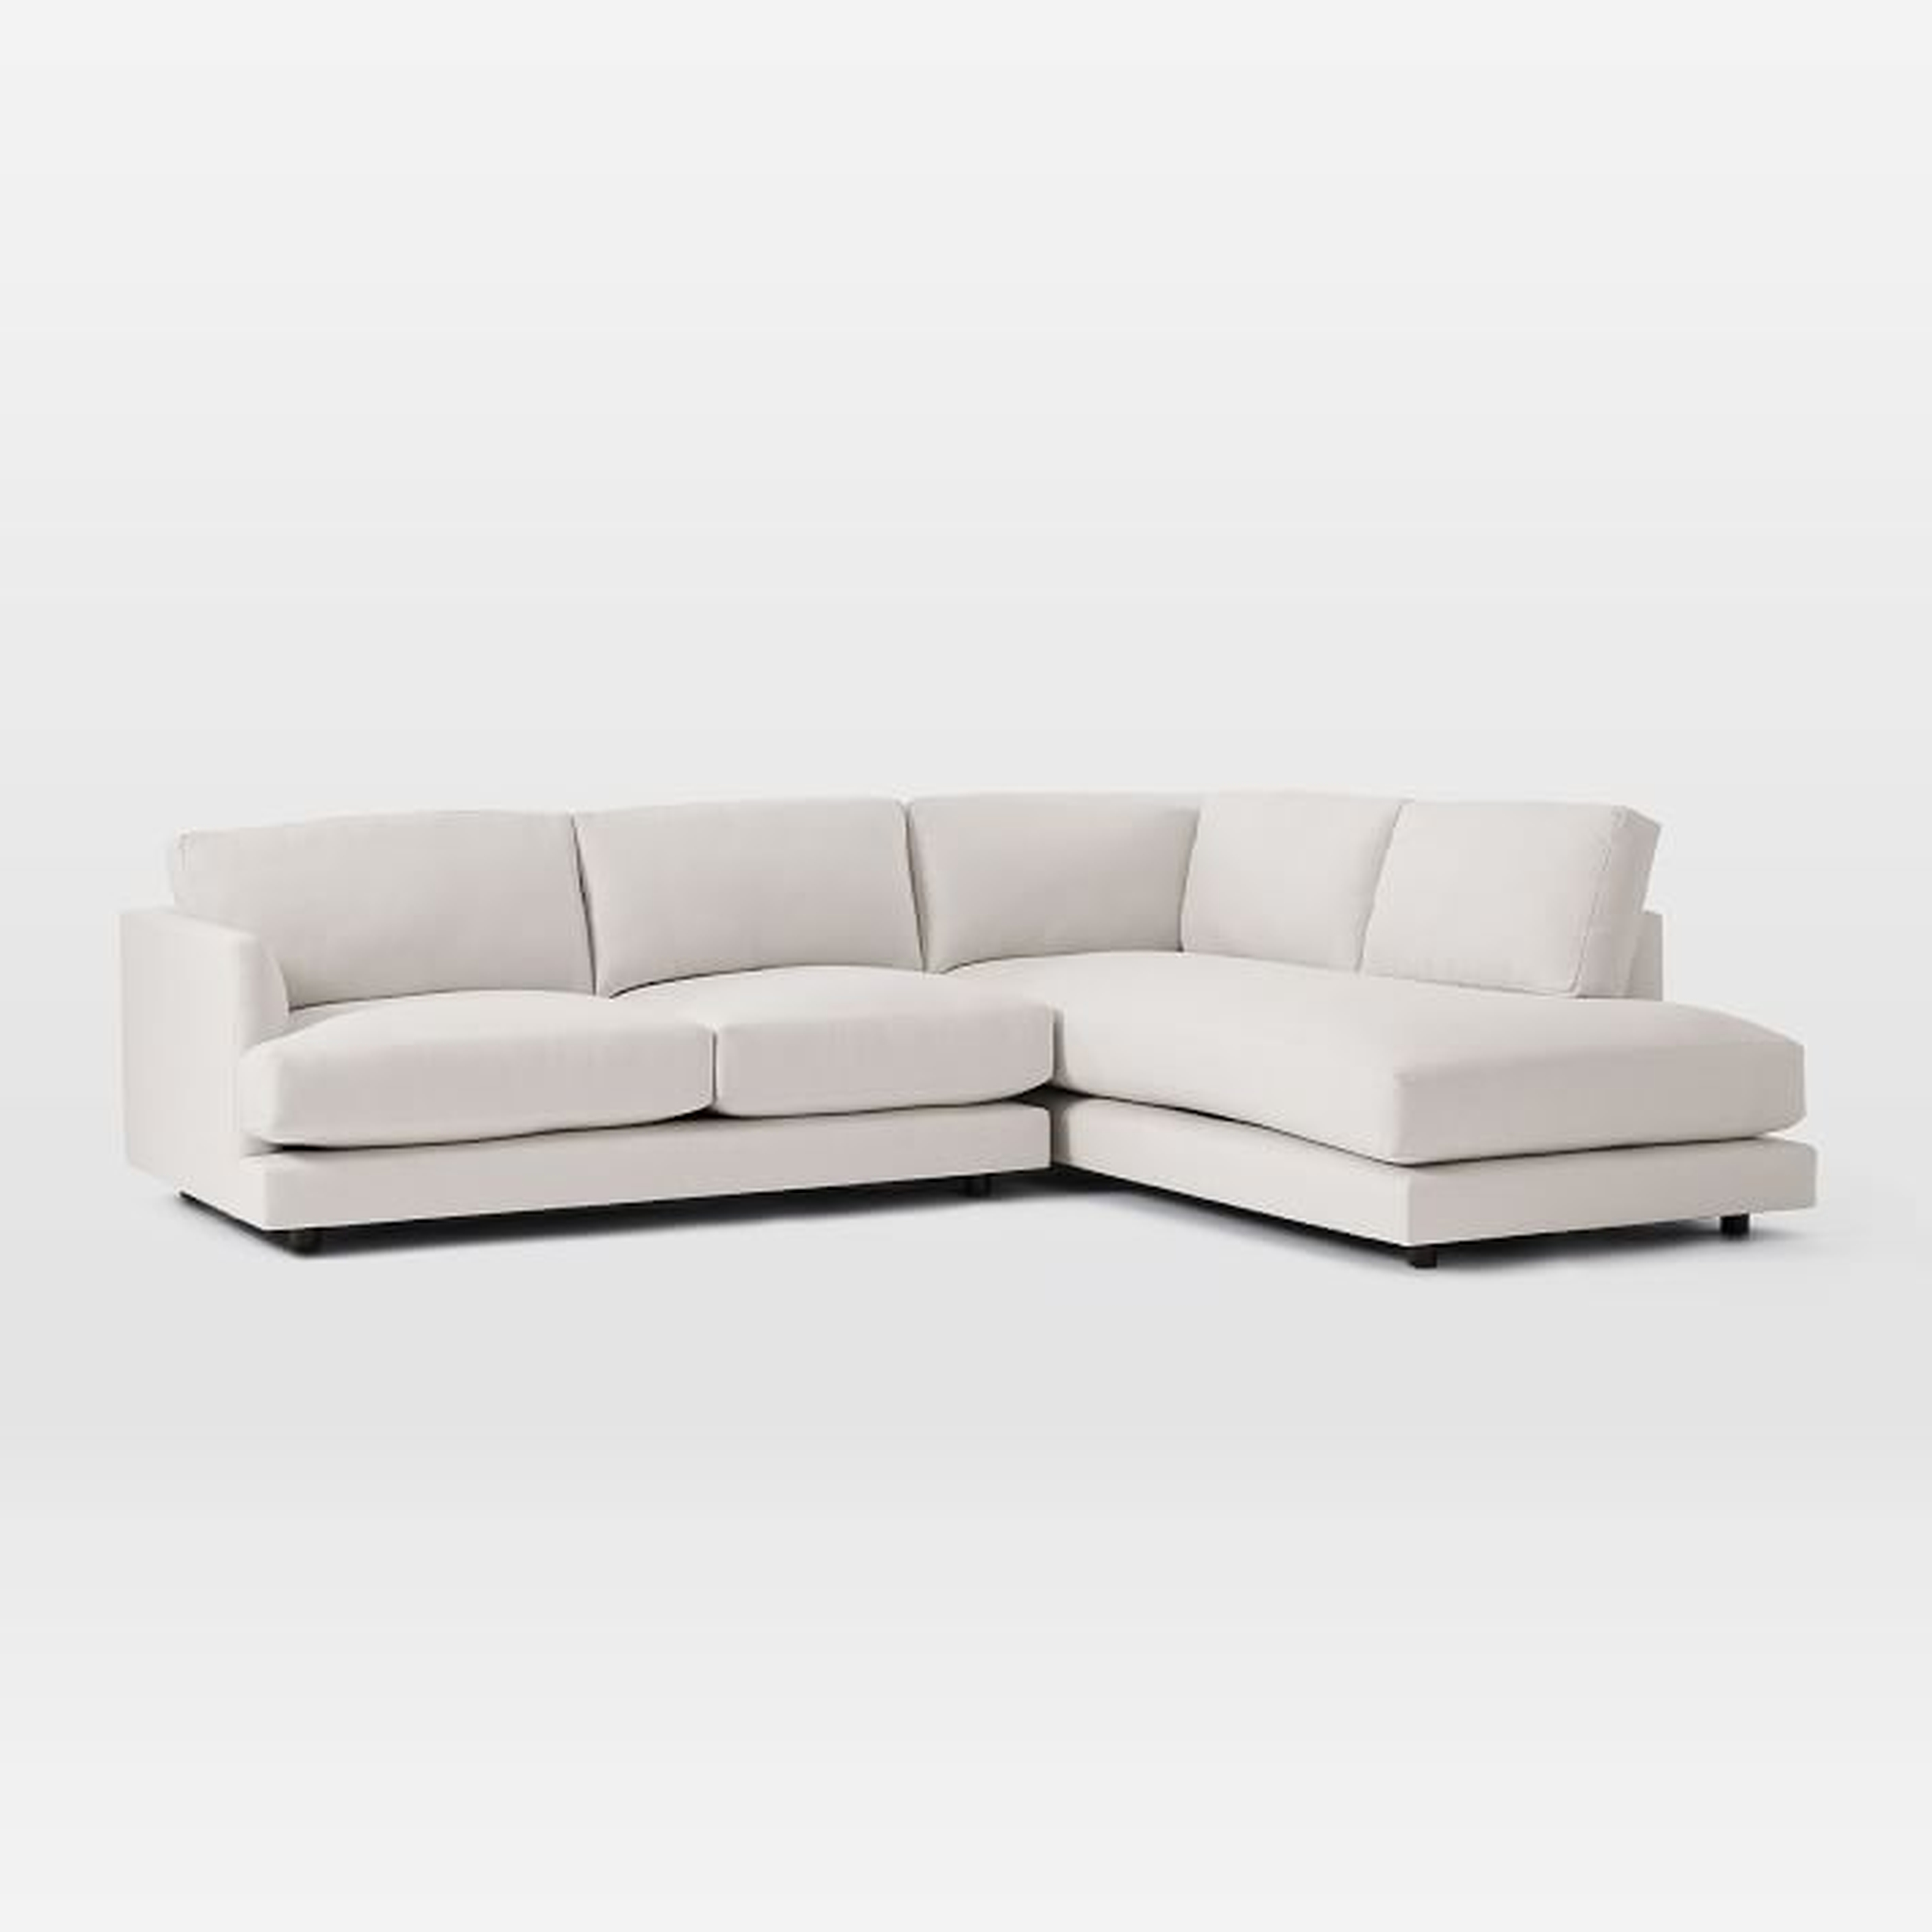 Haven Sectional Set 01: Left Arm Sofa, Right Arm Terminal Chaise, Poly, Eco Weave, Oyster- standard 40" - West Elm